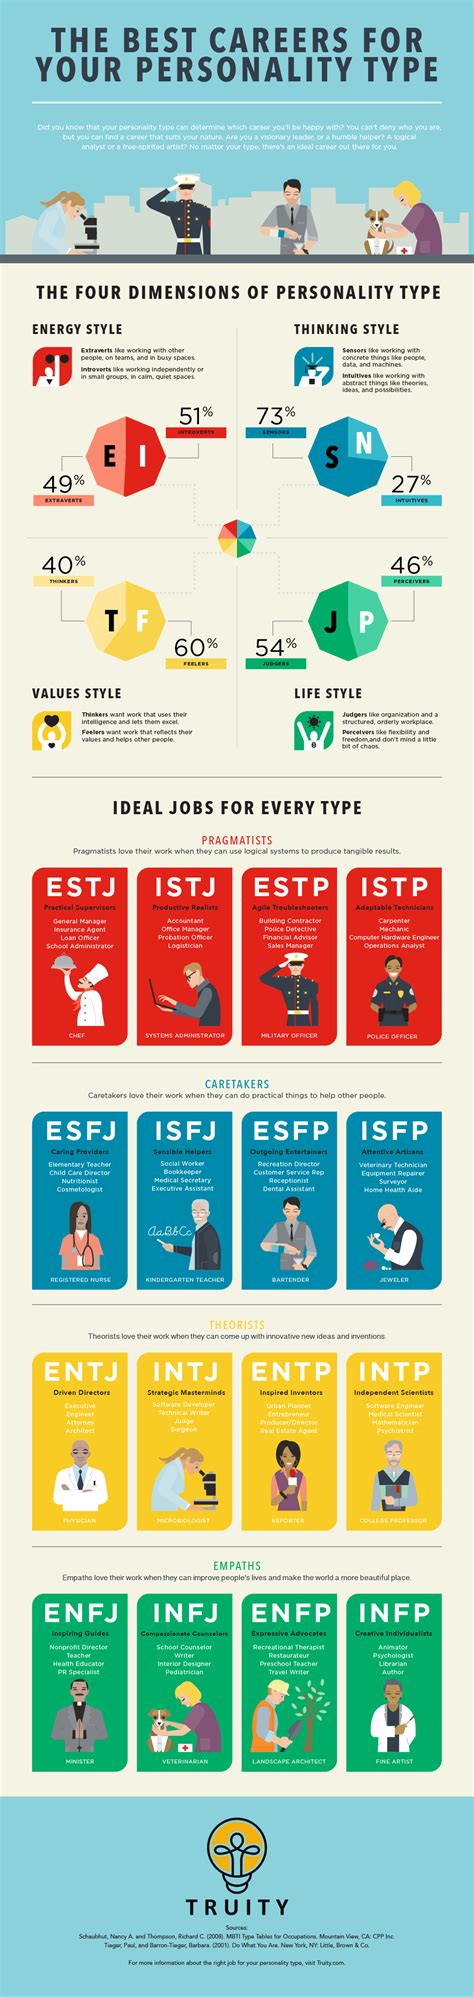 The Best Careers For Your Personality Type Business Insider